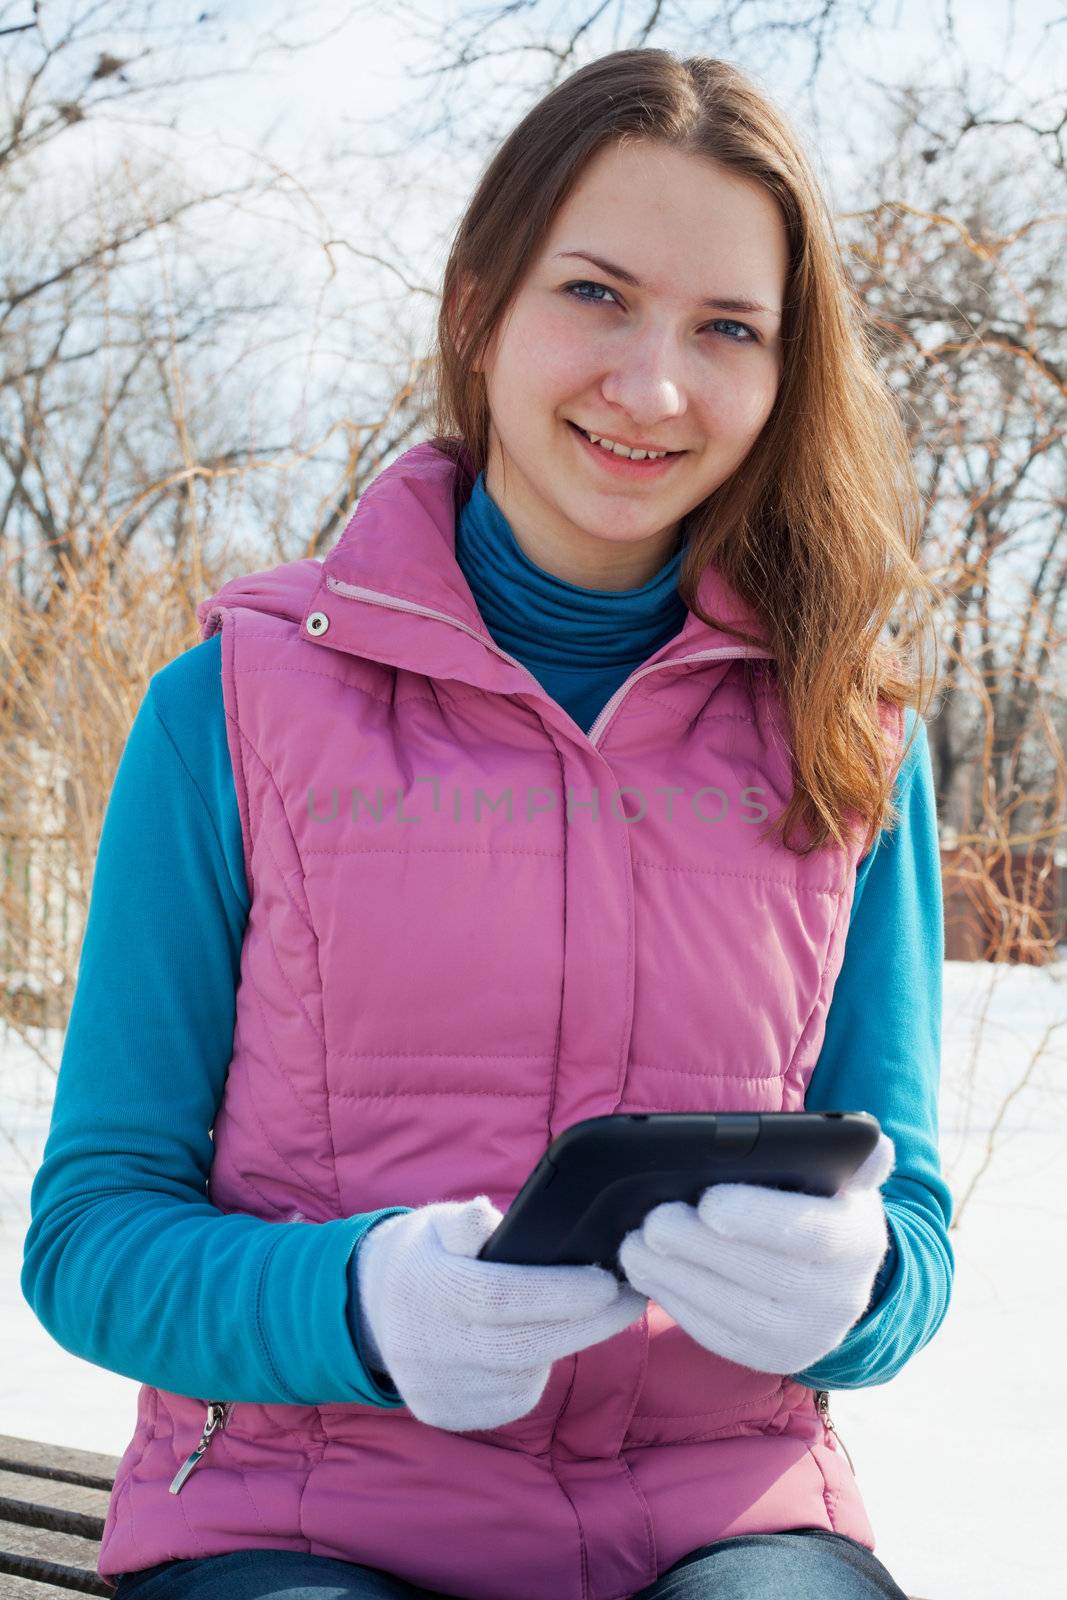 Teen girl with e-book reader in a park at winter time